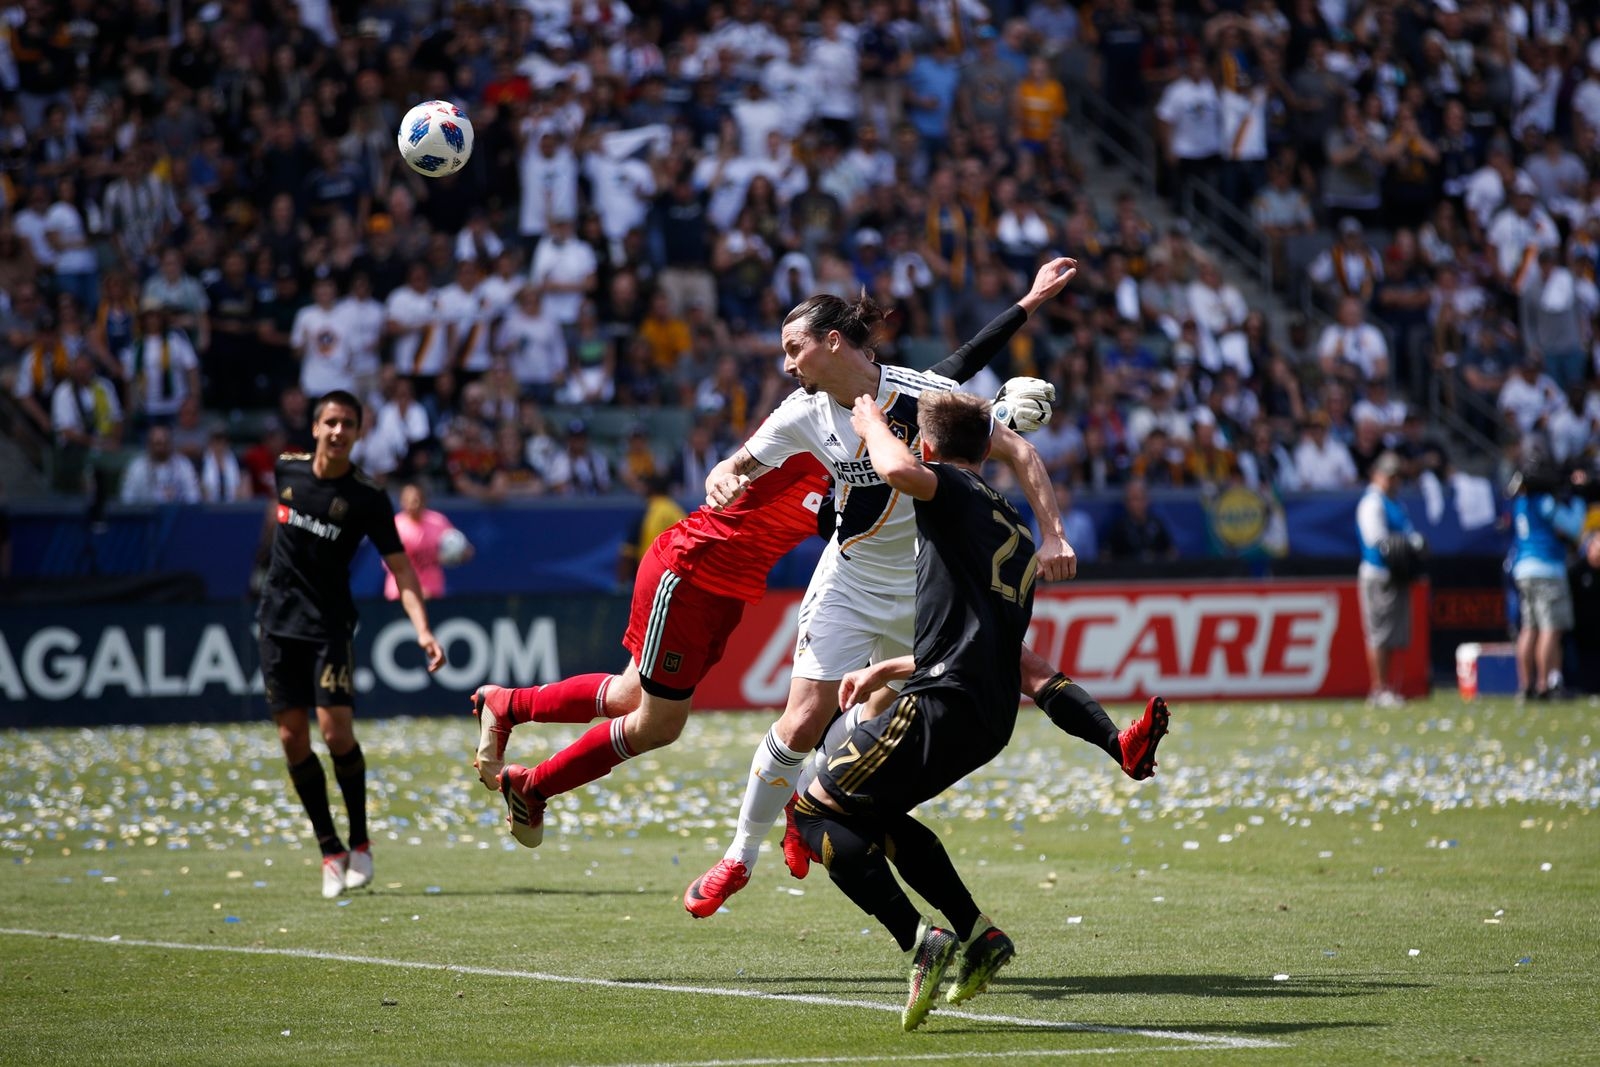 Los Angeles Galaxy's Zlatan Ibrahimovic, center, of Sweden, heads the ball for a goal, his second goal of the game, against Los Angeles FC goalkeeper Tyler Miller during the second half of an MLS soccer match Saturday, March 31, 2018, in Carson, Calif. The Galaxy won 4-3. (AP Photo/Jae C. Hong)